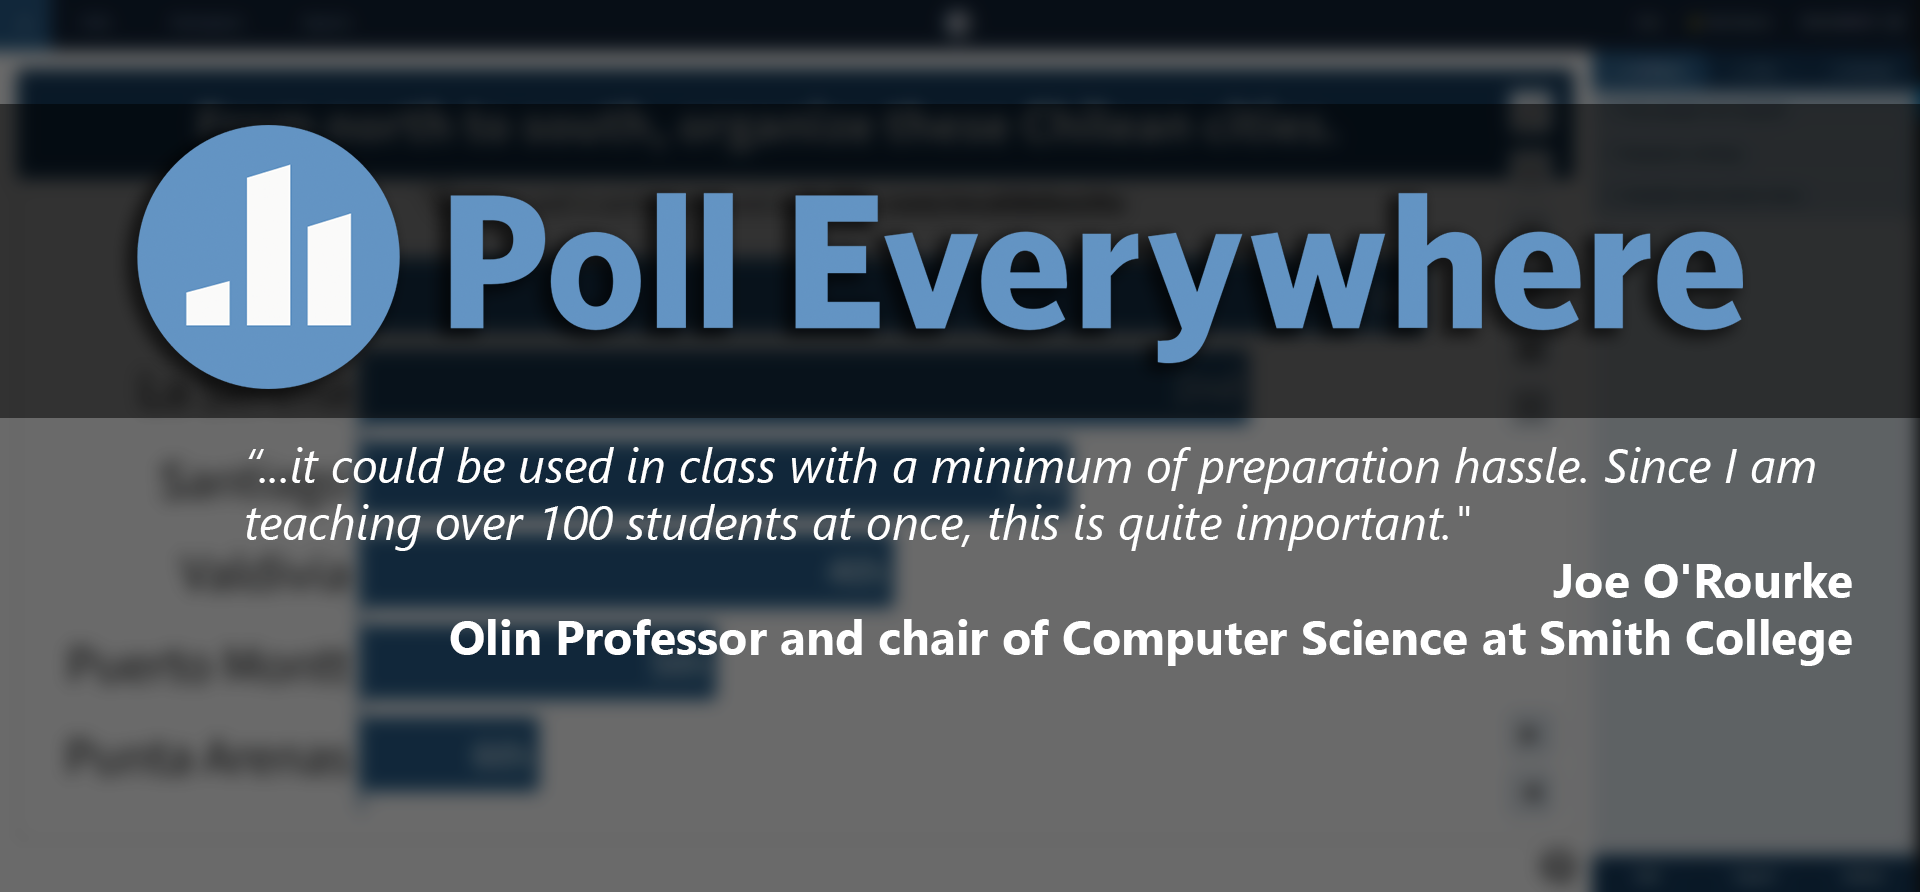  Poll everywhere logo and quote from Joe O'Rourke: “...it could be used in class with a minimum of preparation hassle. Since I am teaching over 100 students at once, this is quite important.